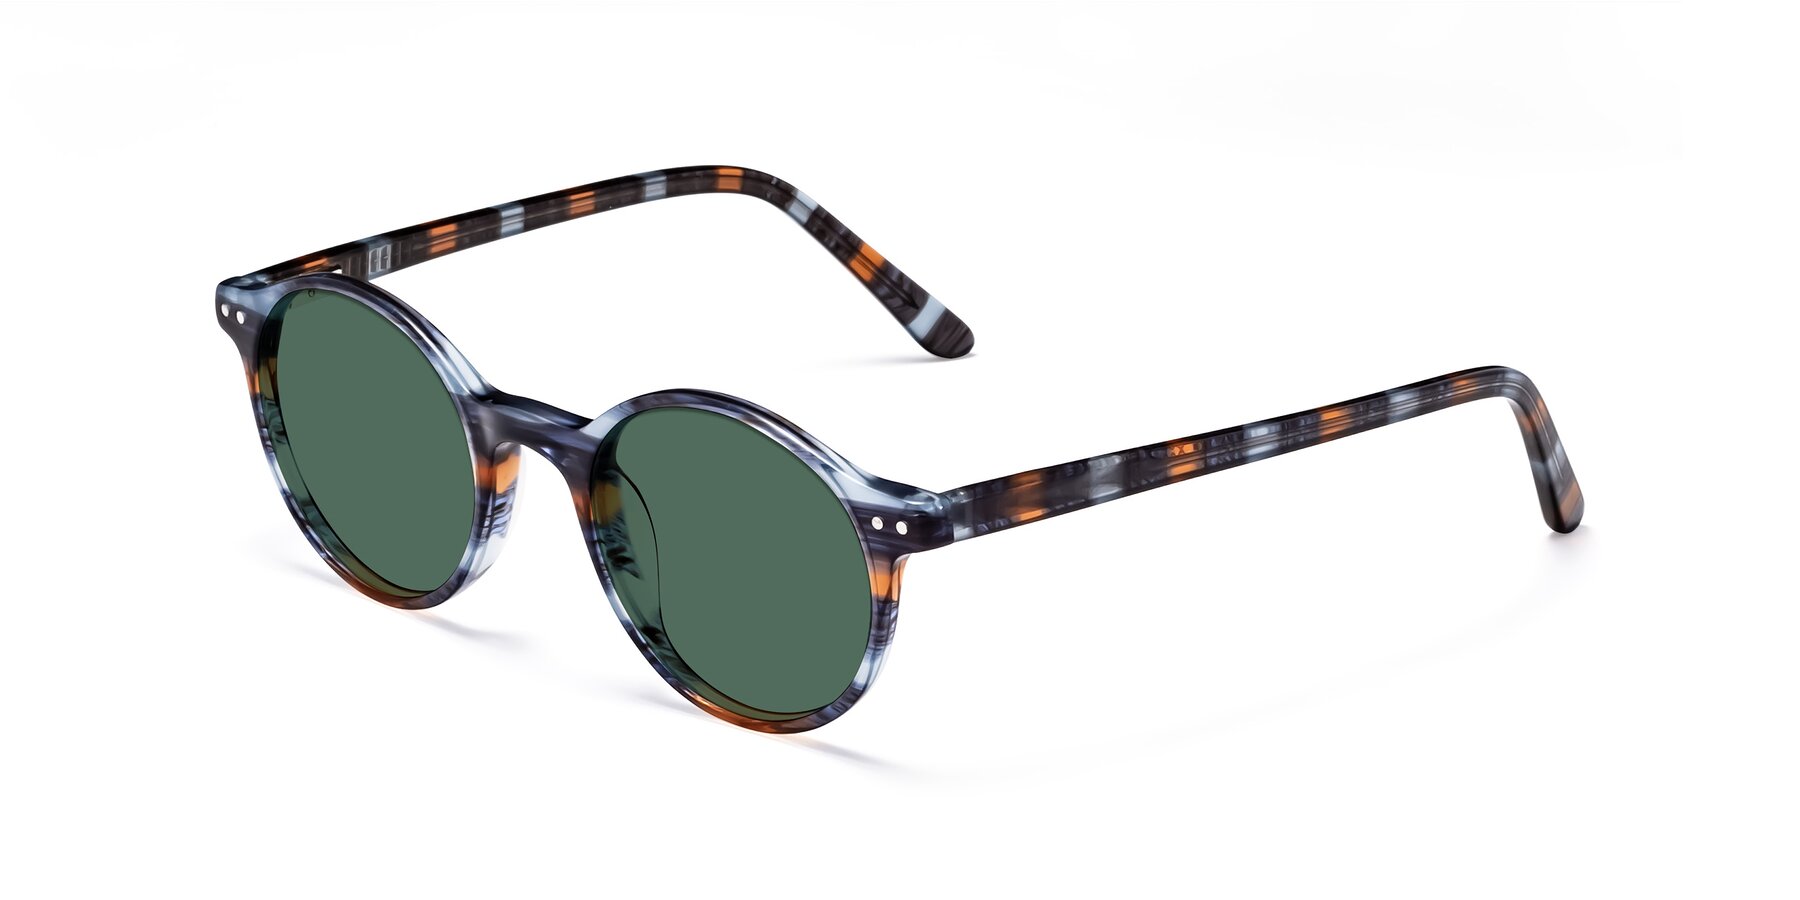 Angle of Jardi in Stripe Blue Brown with Green Polarized Lenses